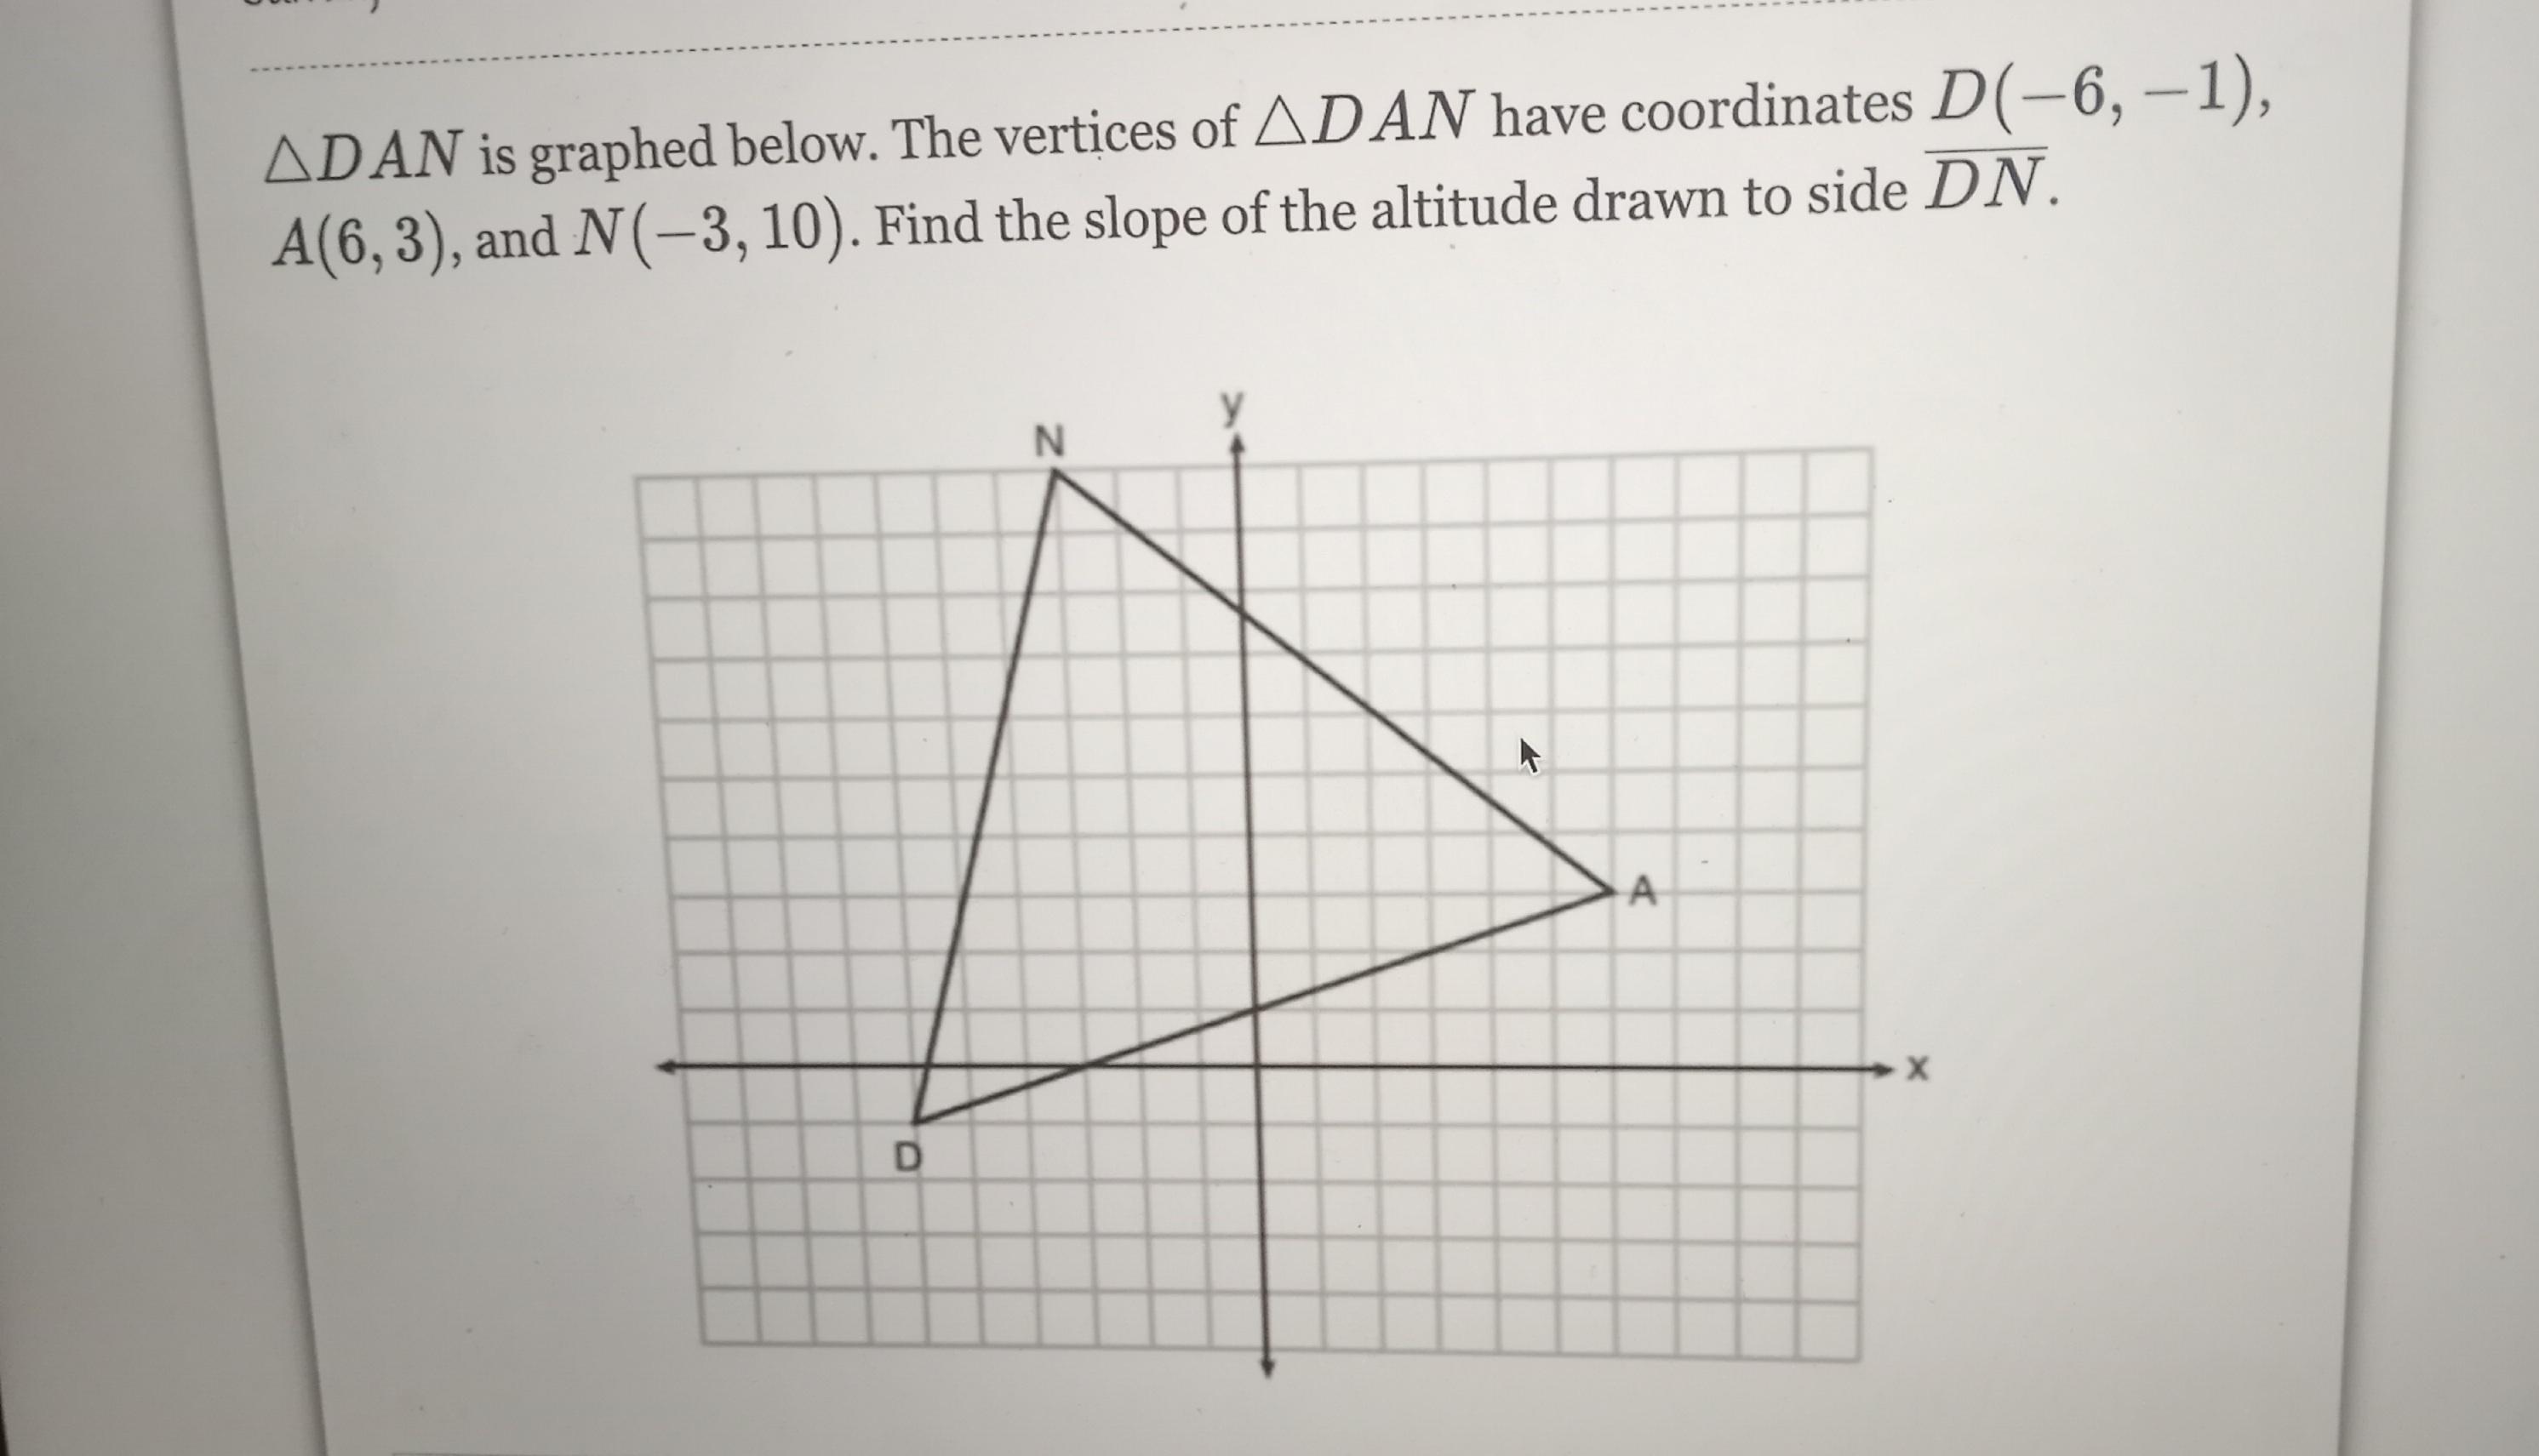 DAN Have Coordinates D(-6, -1) The Altitude Drawn To Side DN